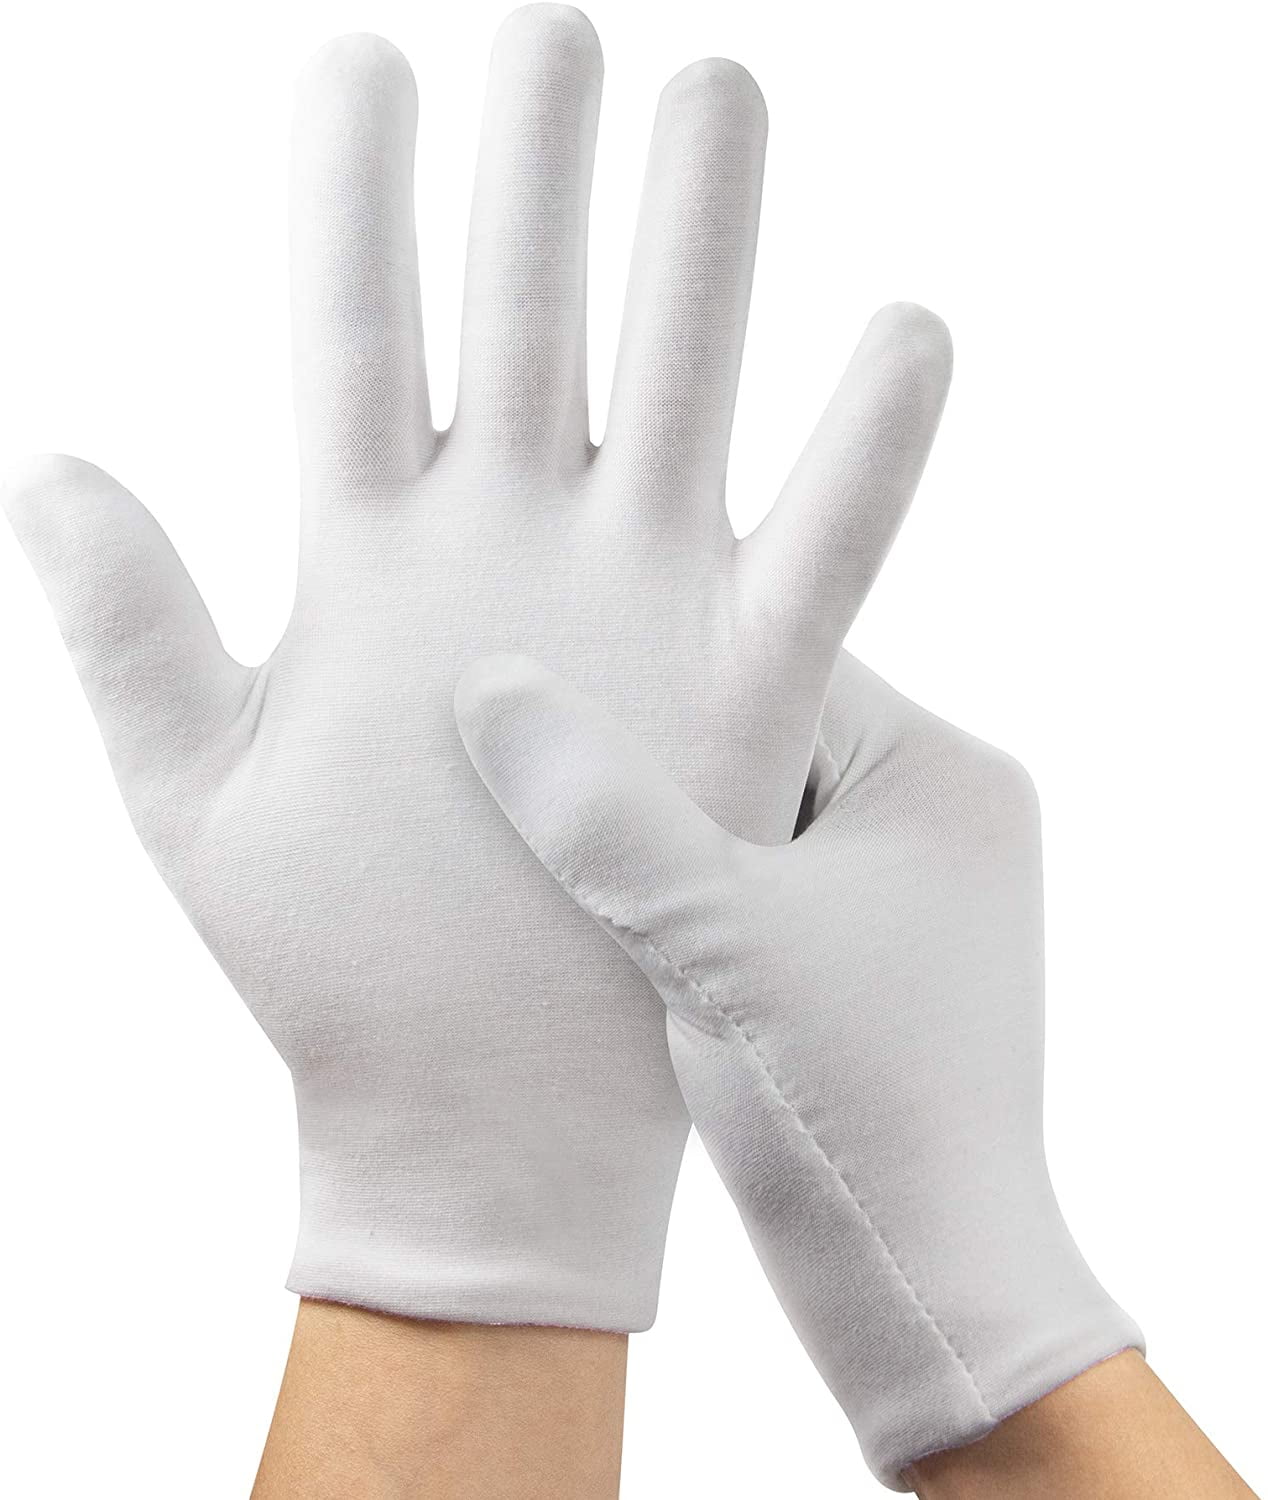 White Cotton Inspection Gloves for Handling Coins Jewelry and Collectibles 